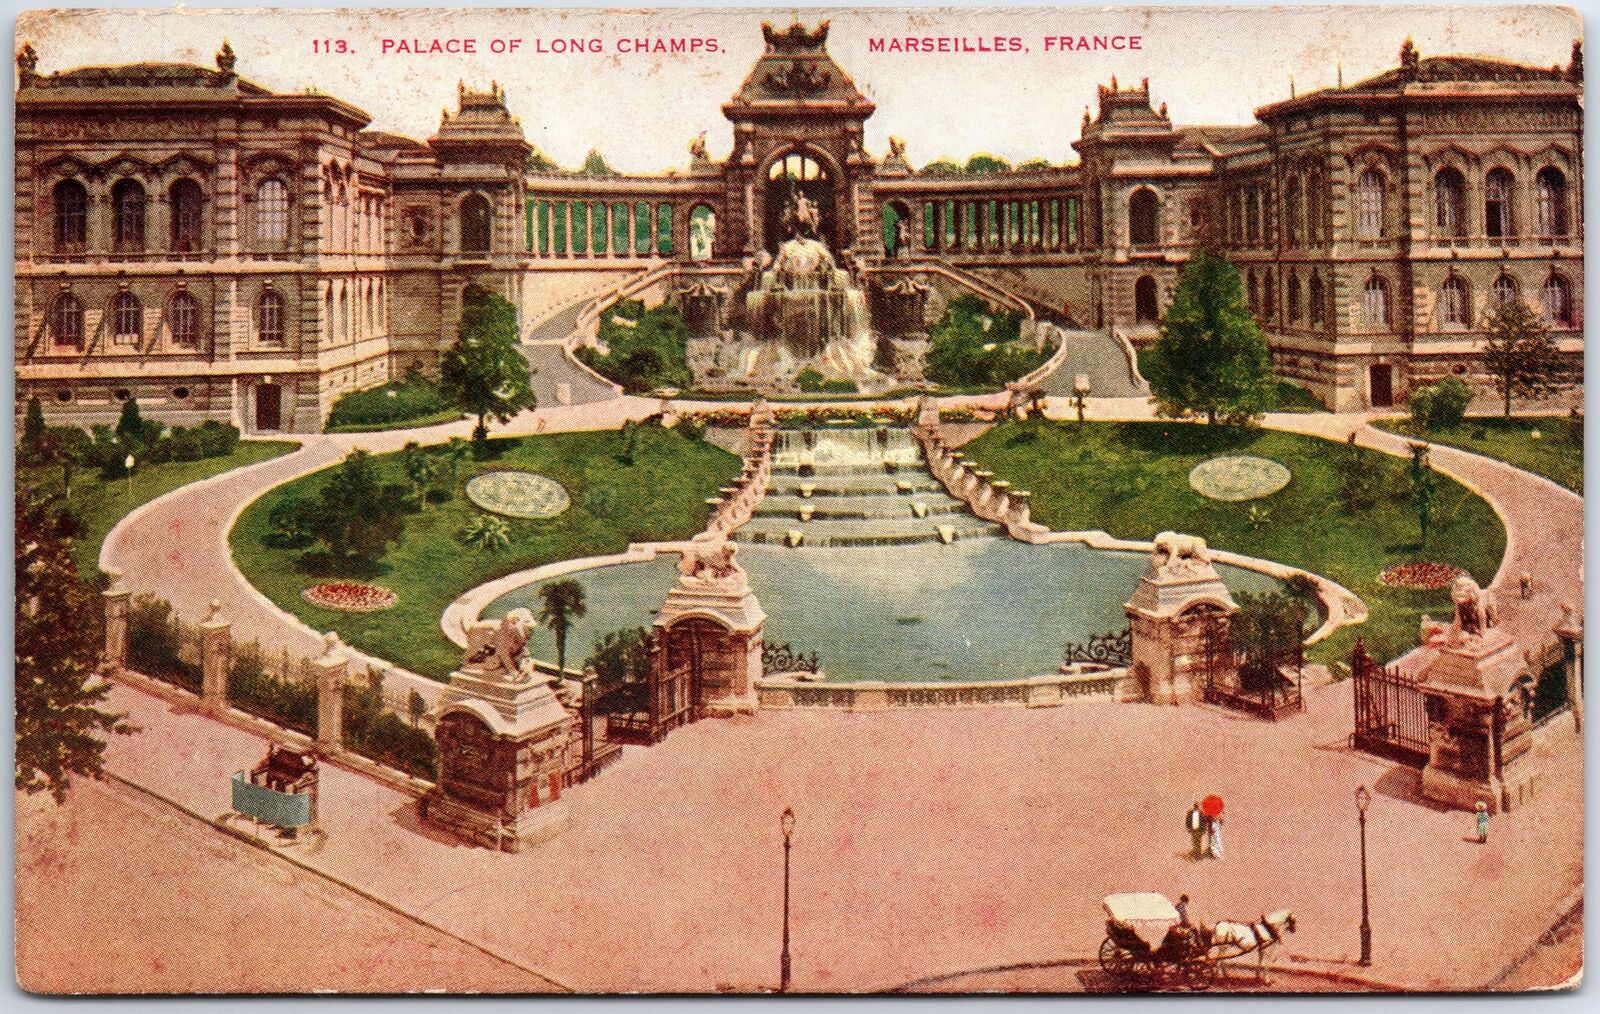 VINTAGE POSTCARD PALACE OF LONG CHAMPS AT MARSEILLES FRANCE HORSE CARTS FOUNTAIN